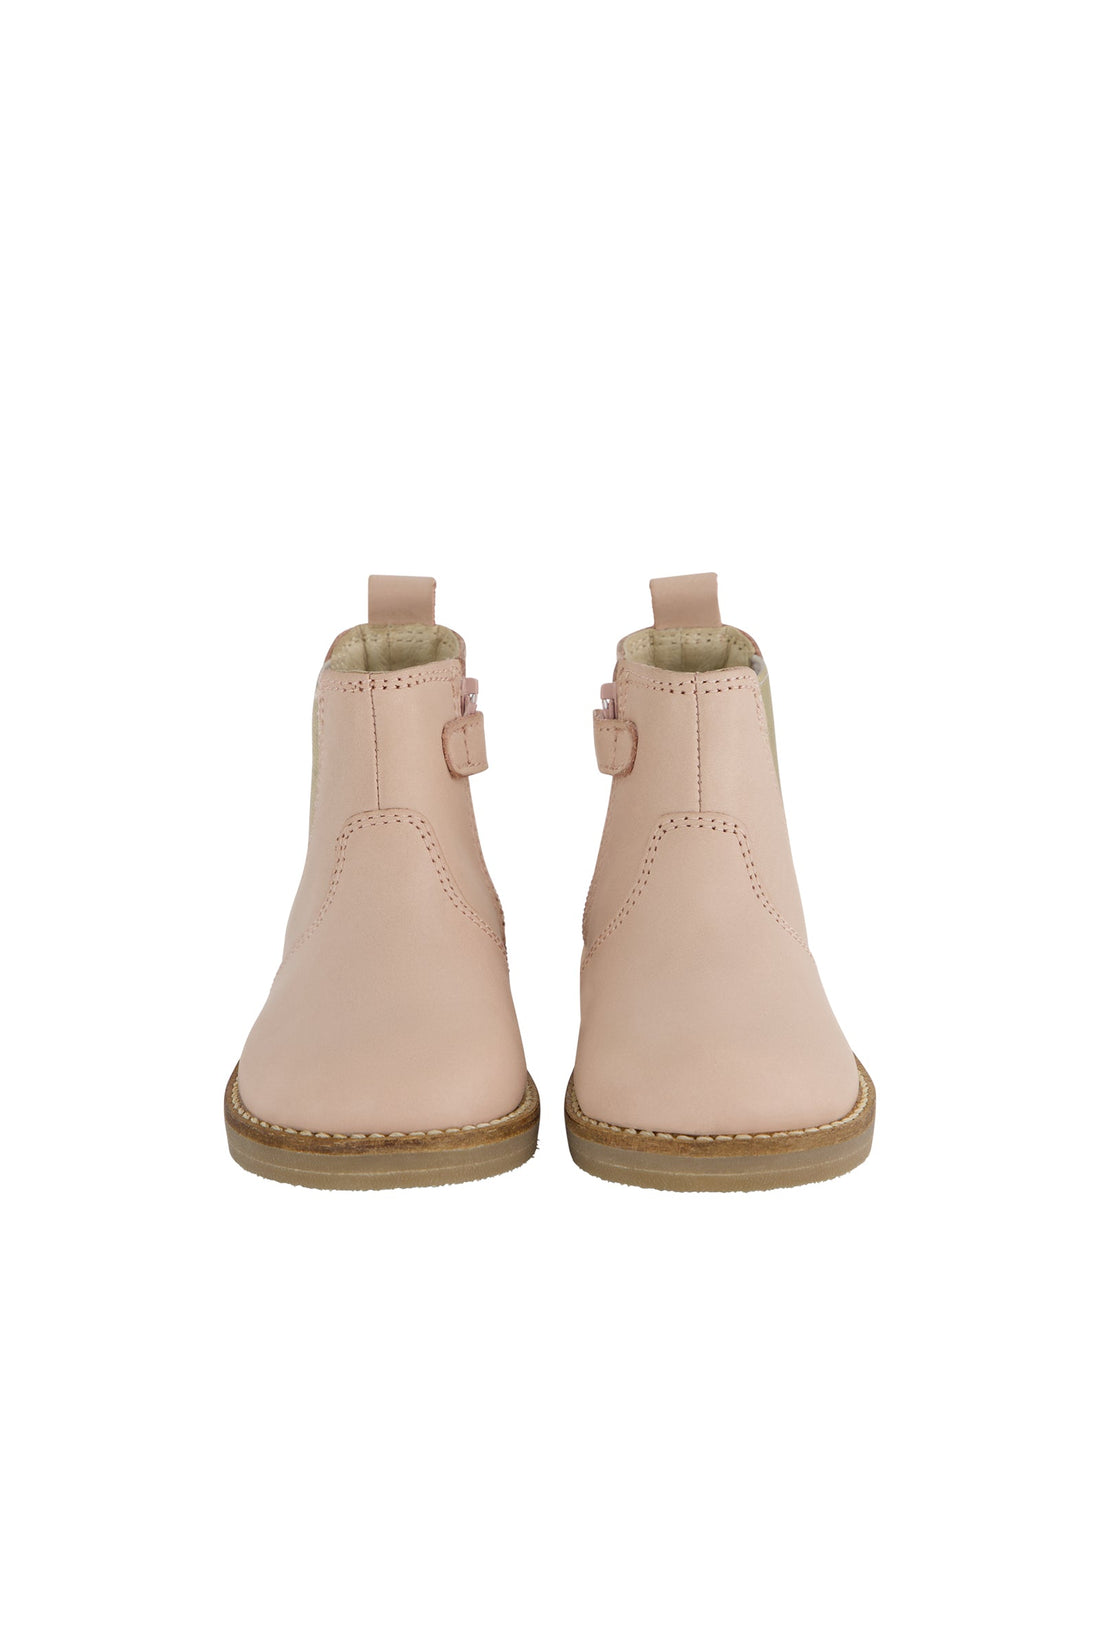 Leather Boot with Elastic Side - Blush Childrens Footwear from Jamie Kay NZ